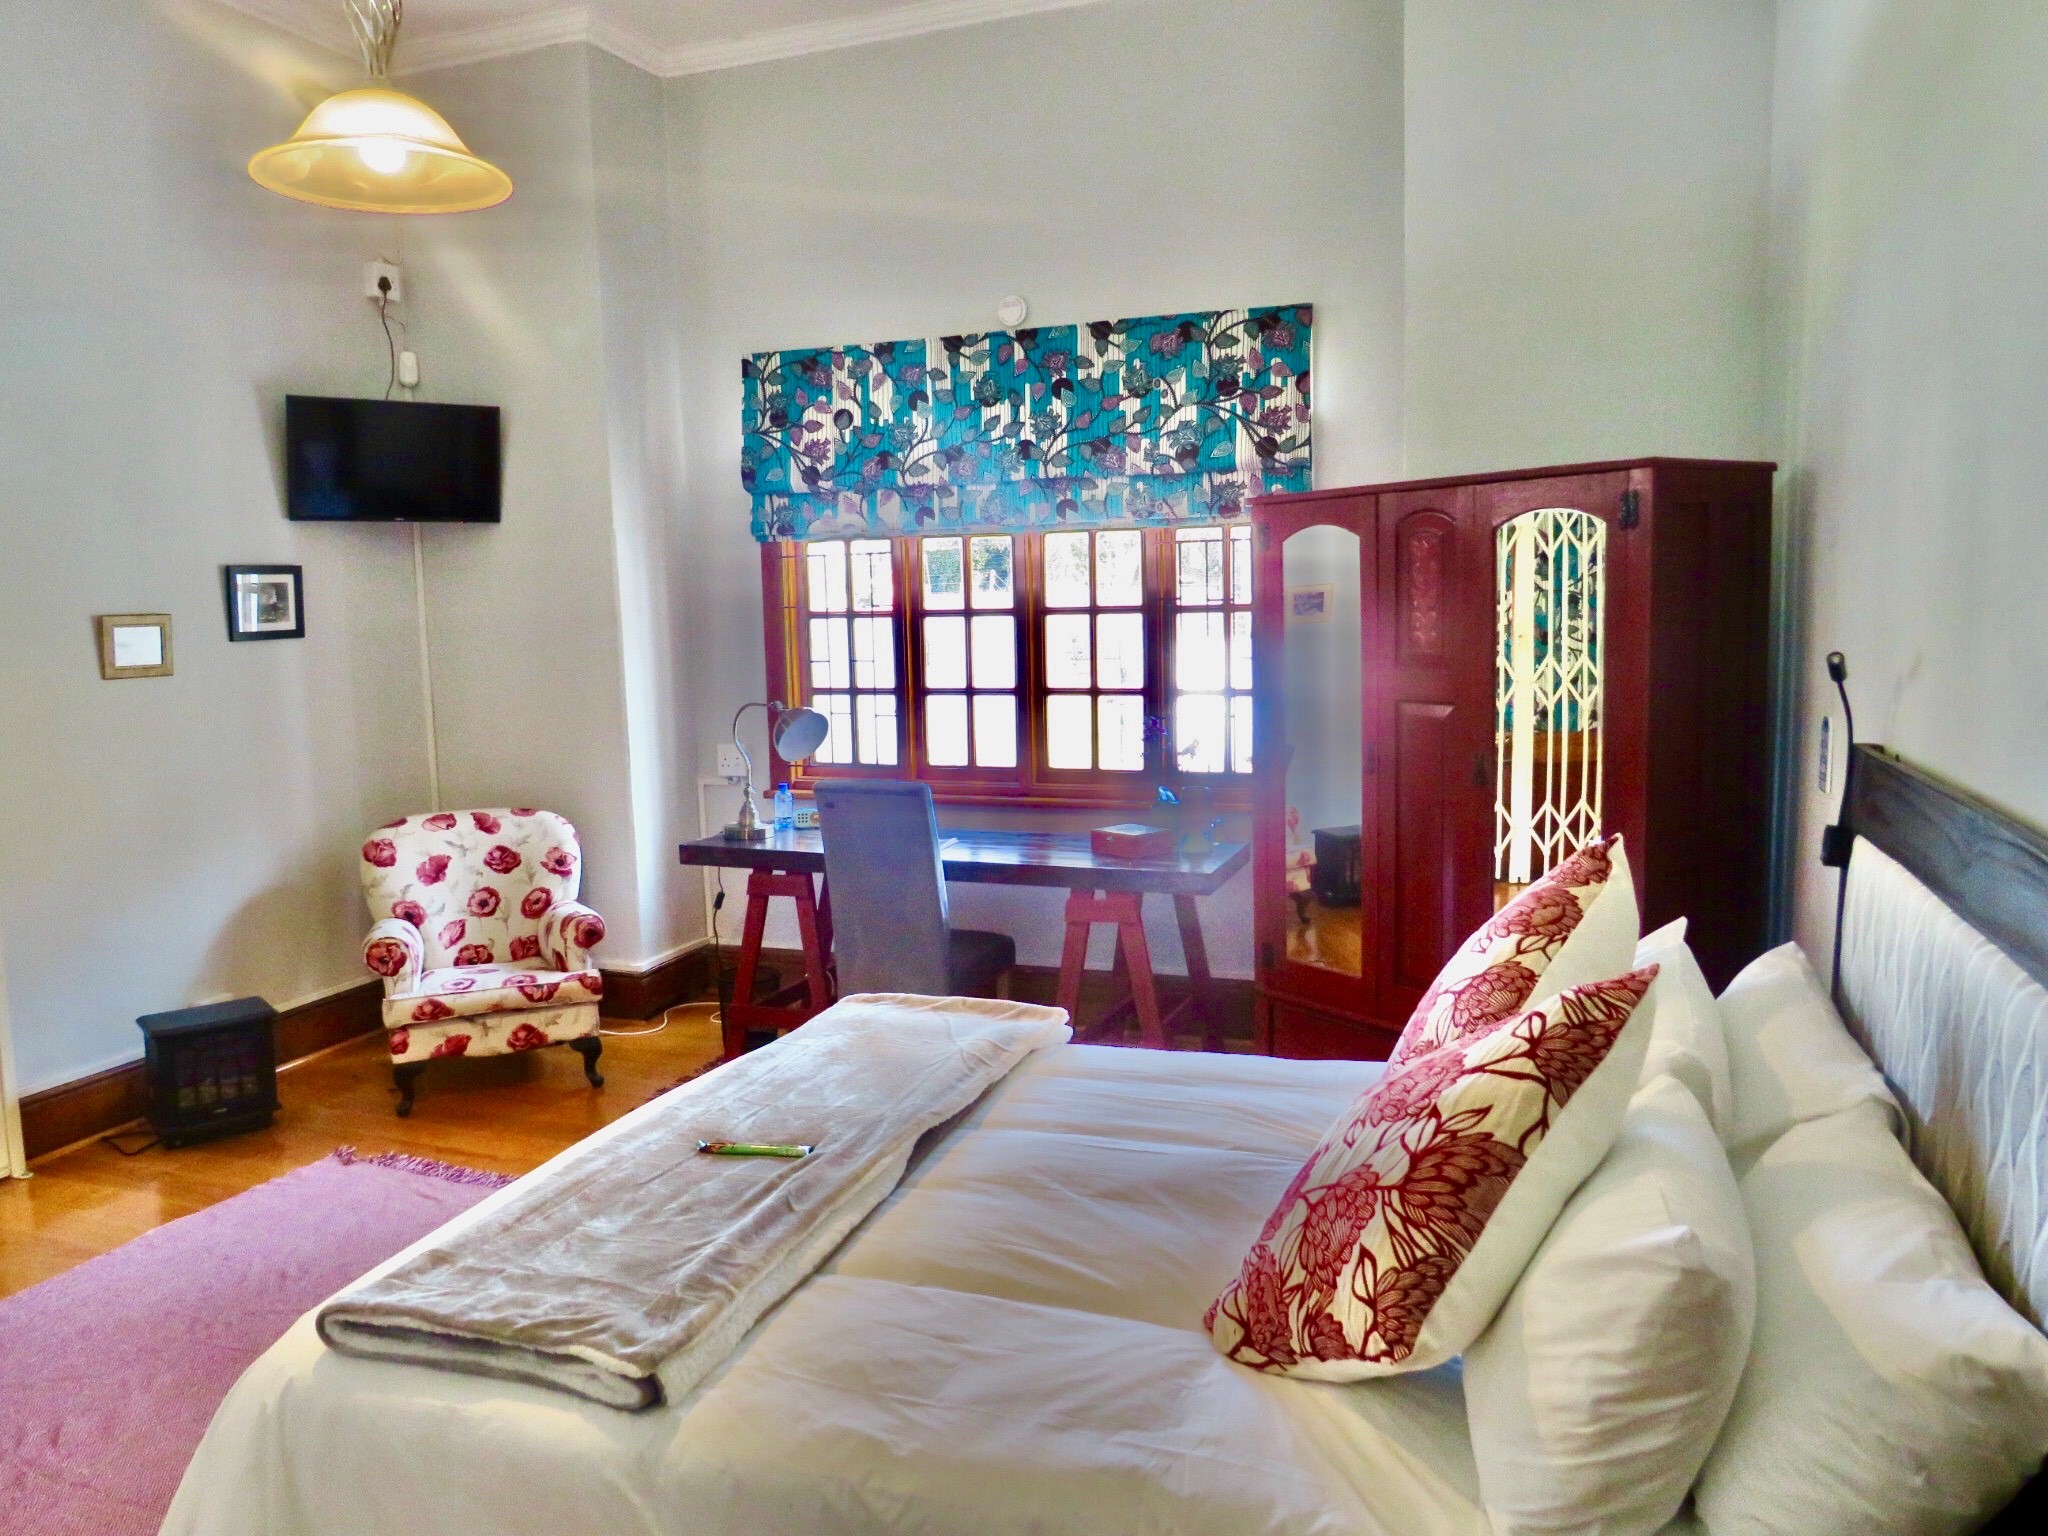 Whistlewood Guest House - The Bean Room